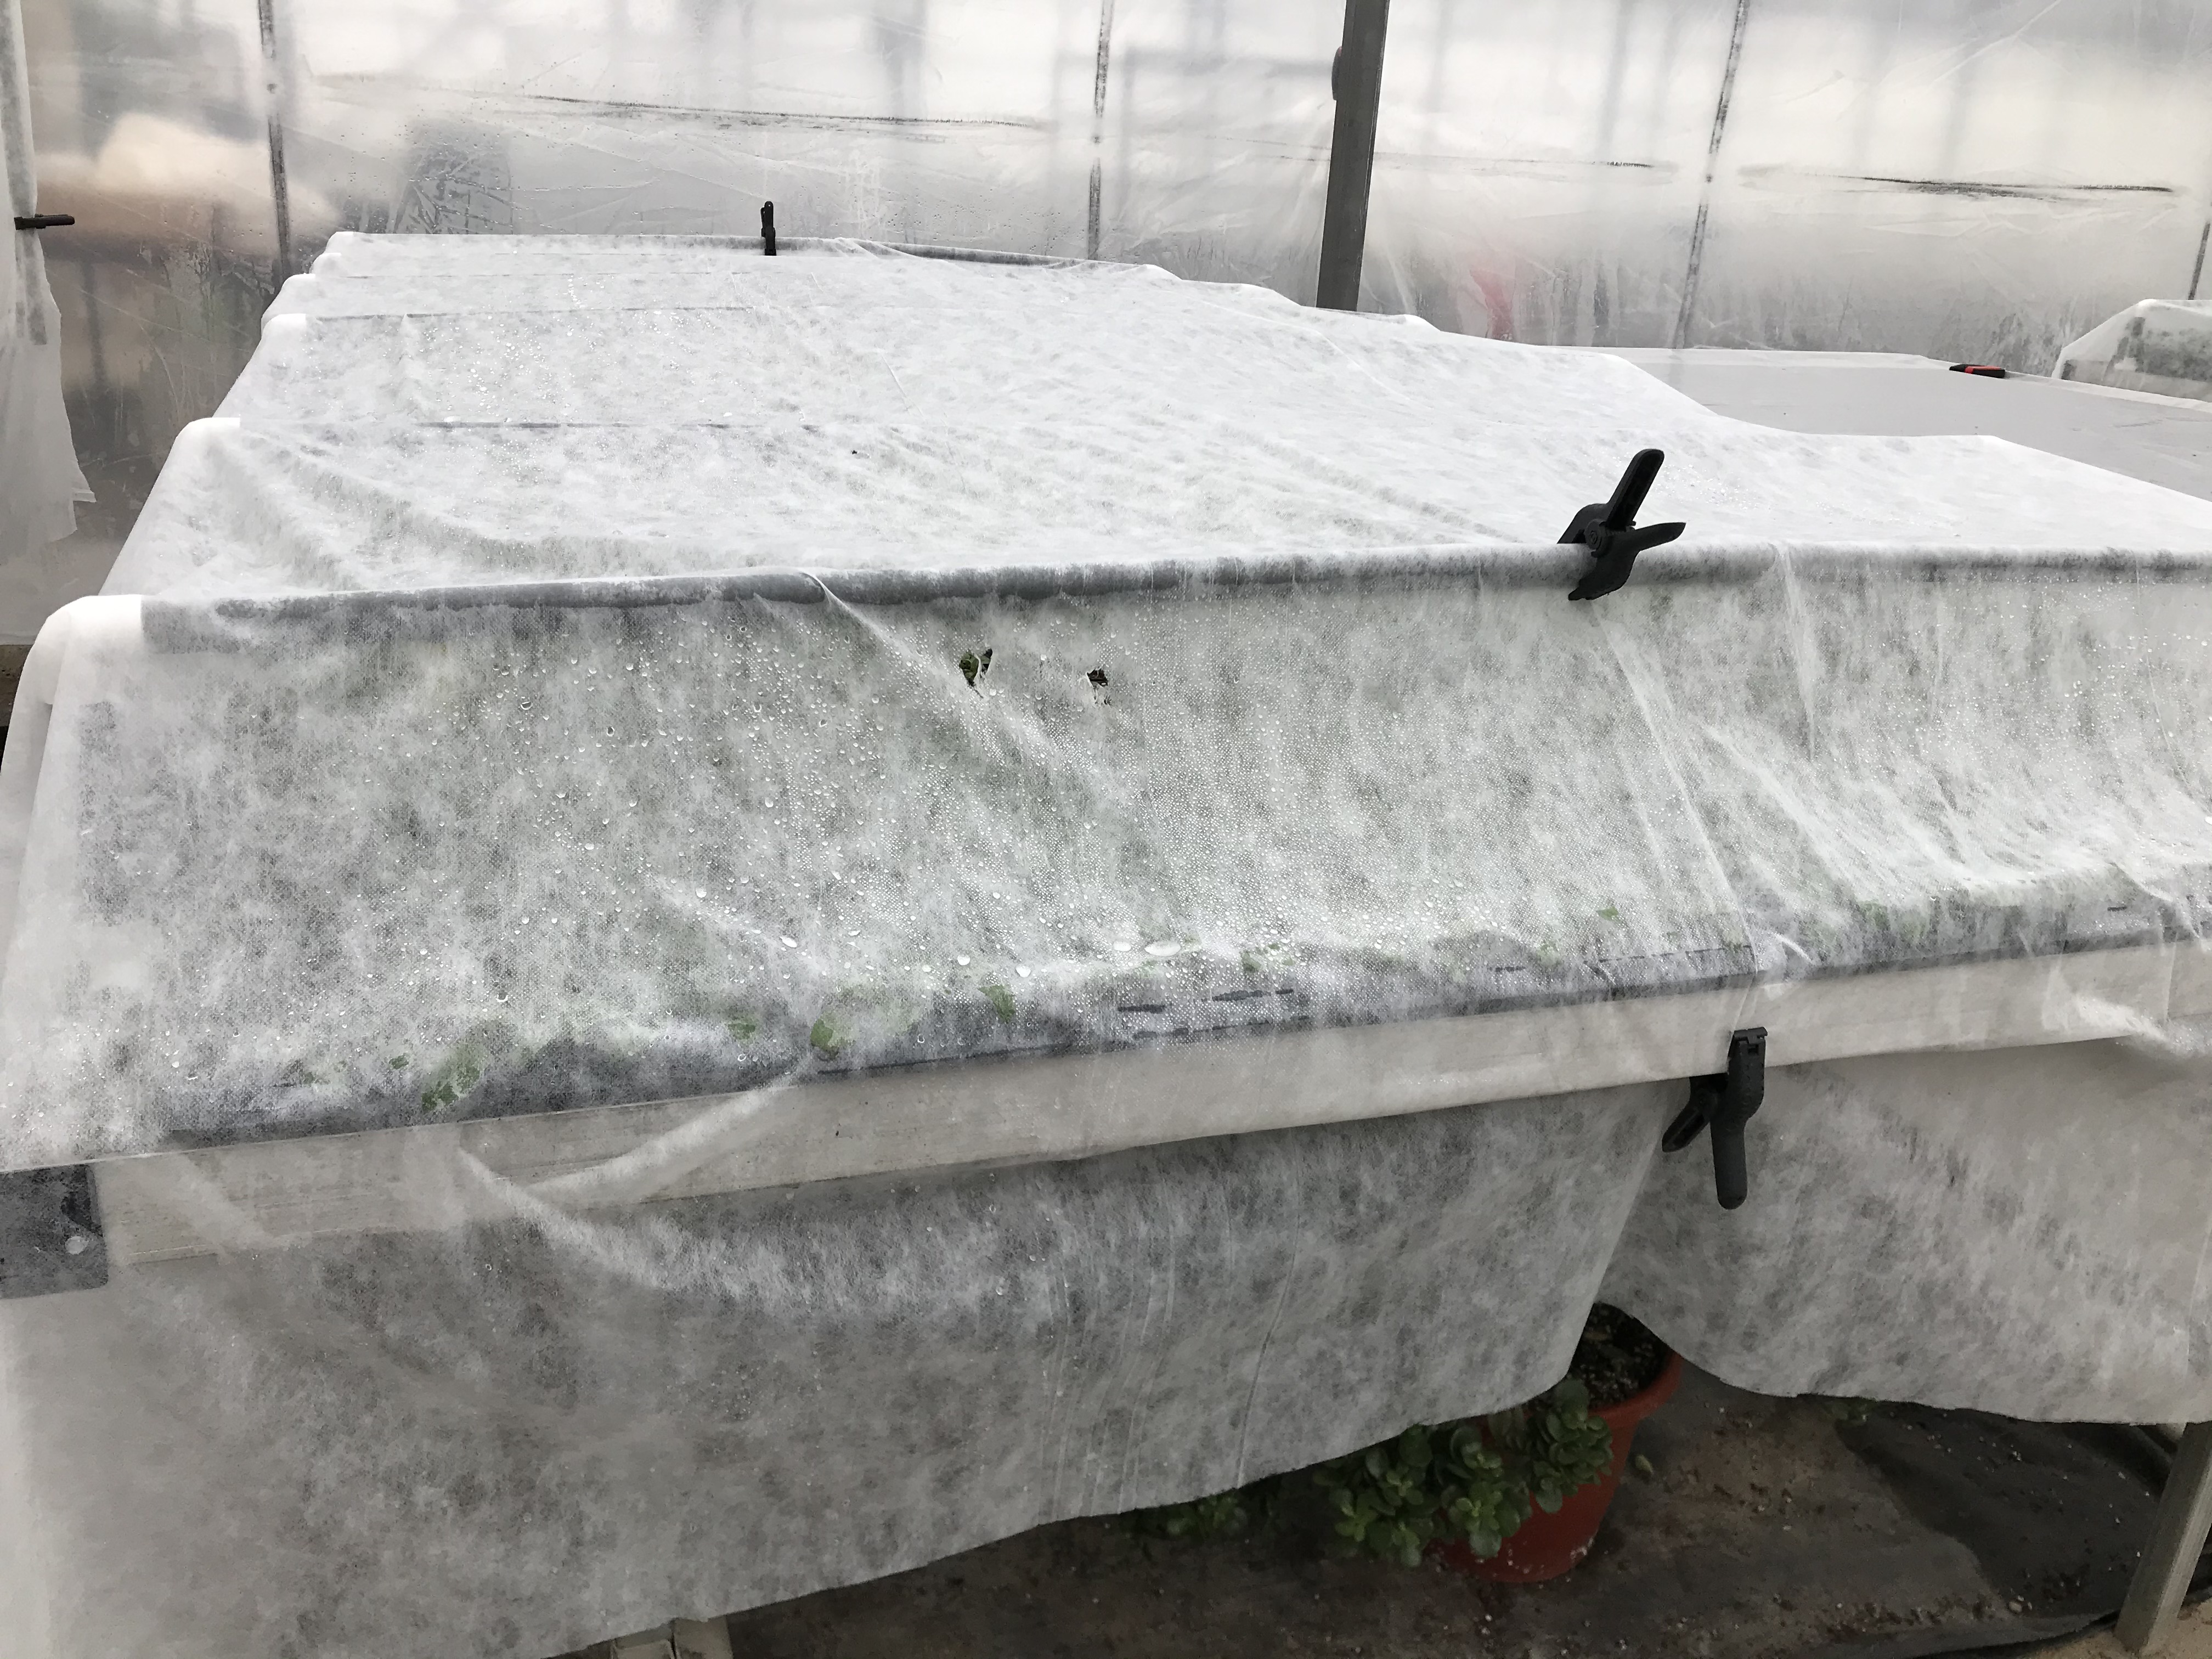 Fabric tent covering crops in a greenhouse